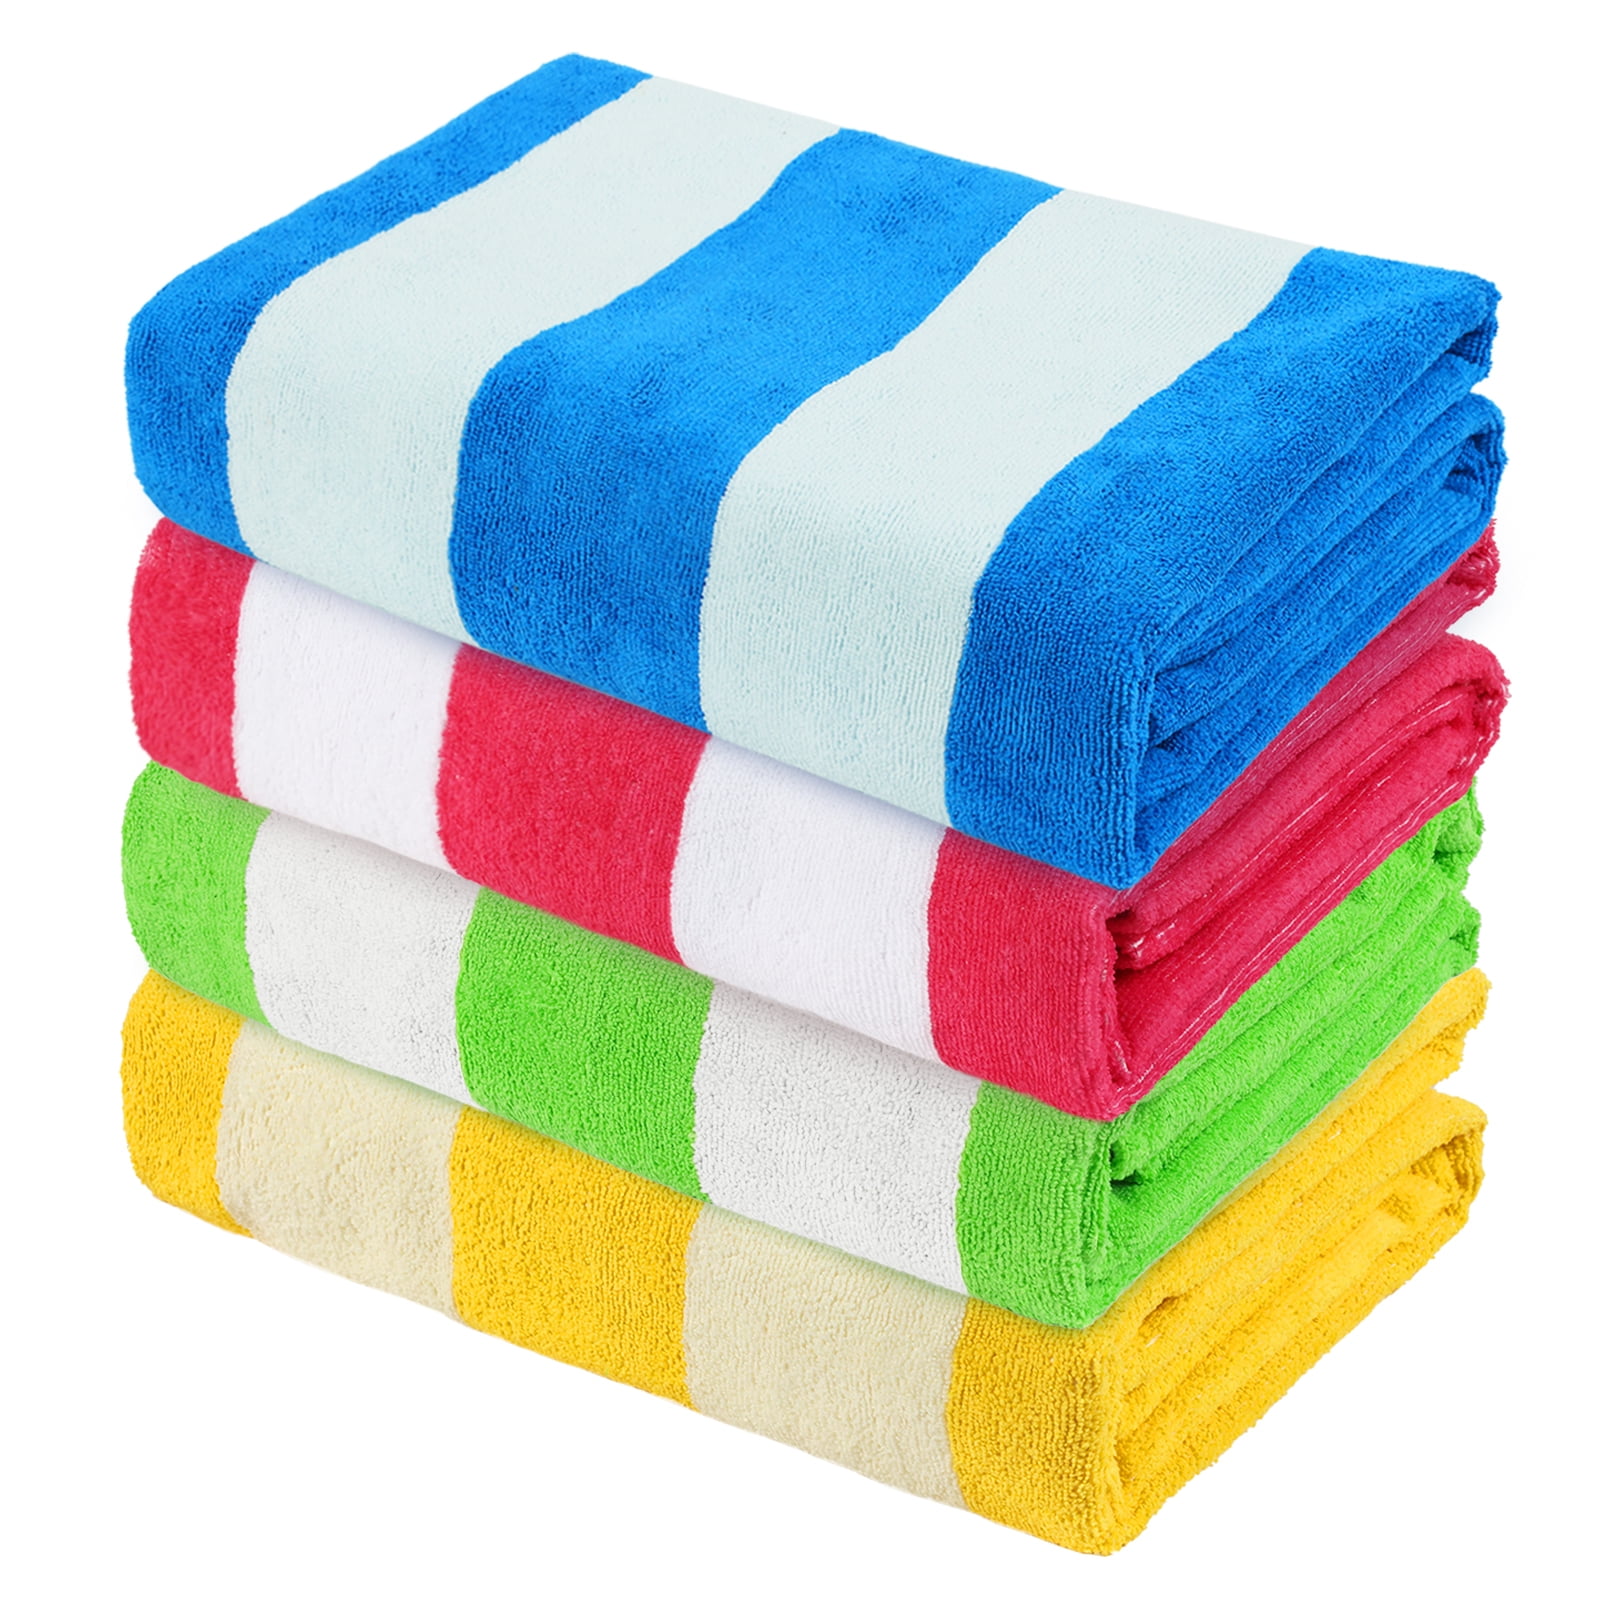 Meuva Towel Two In One Soft And High Density Set Coral Absorben And Towel  Bath Home Textiles Beach Tech Towels Beach Towel And Bag Set Big Body Towels  Towel Large Kids Towel